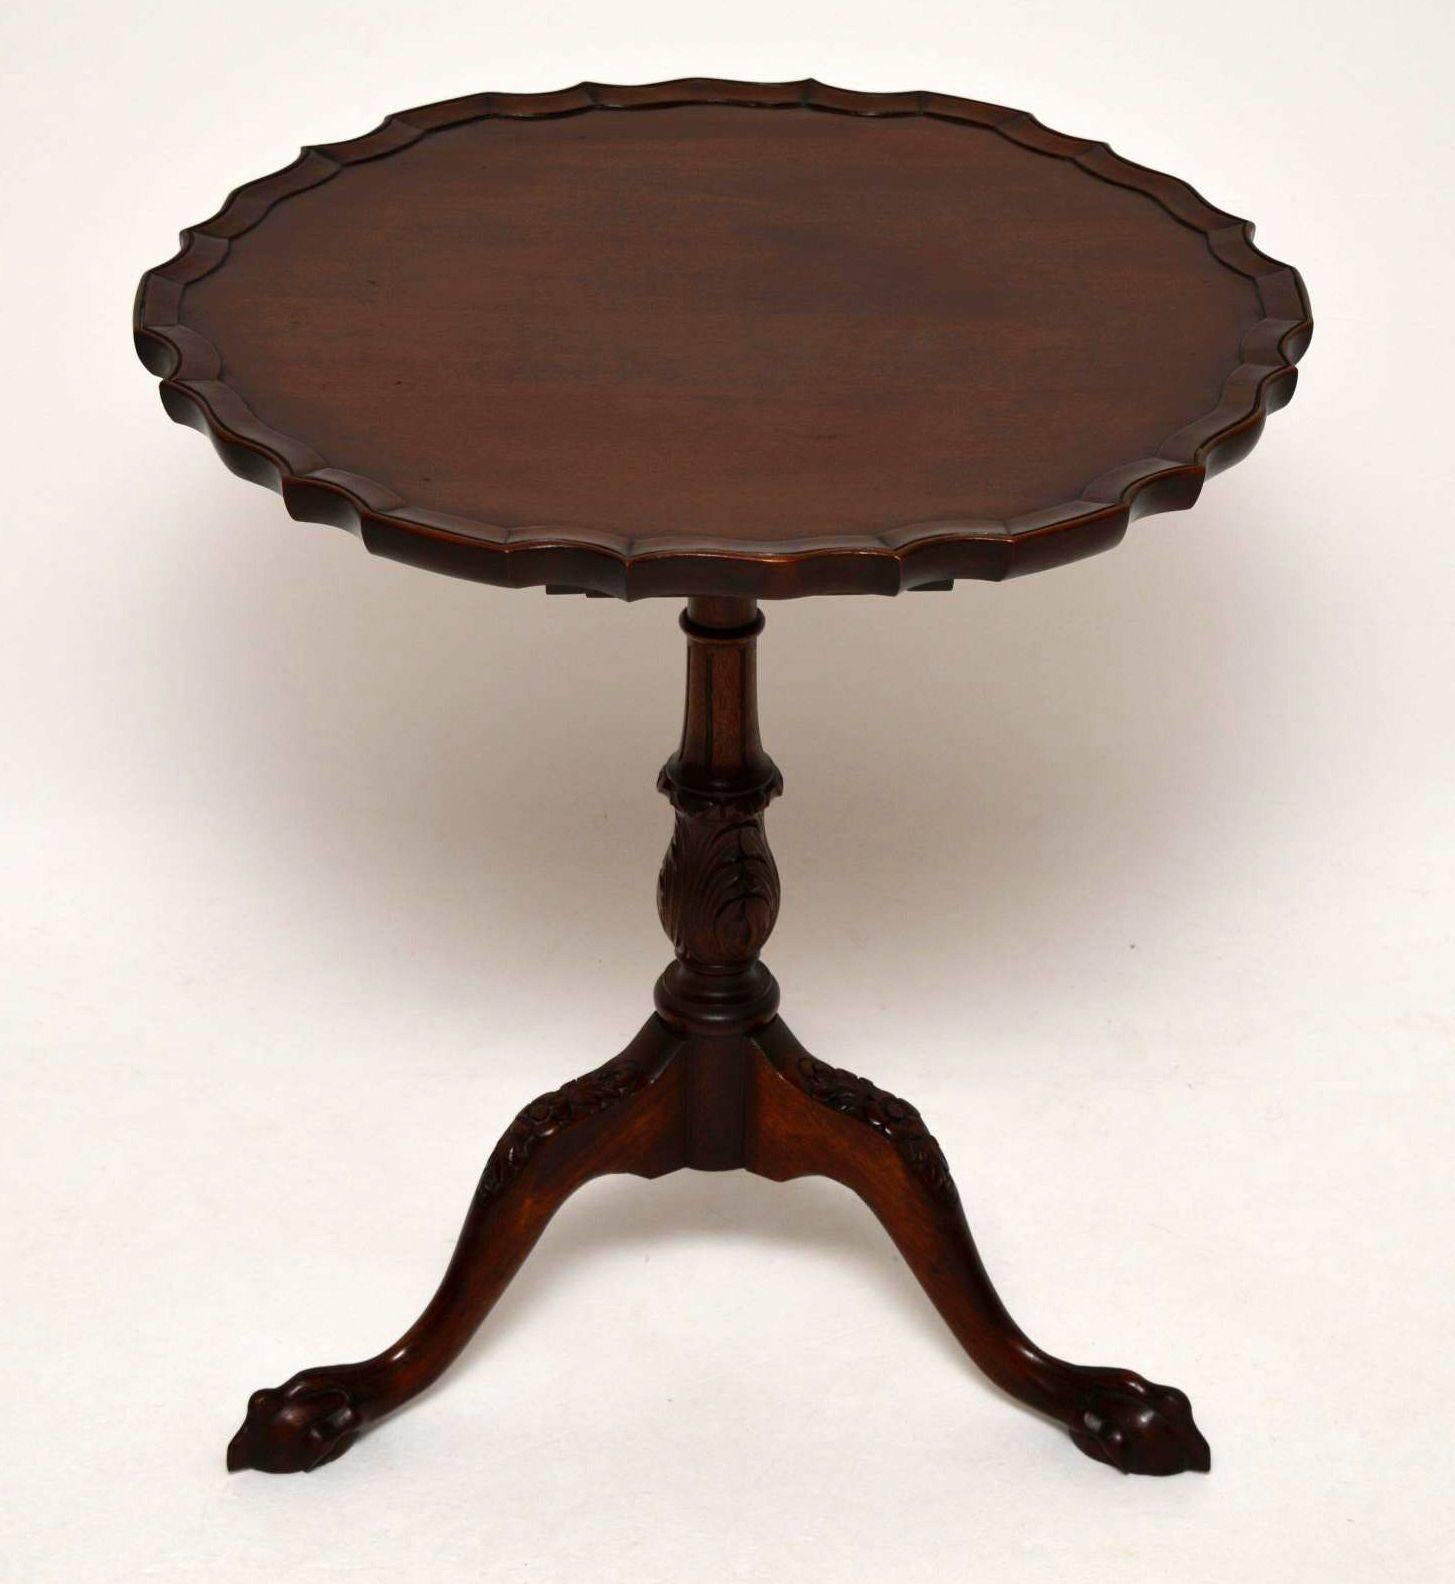 Antique Chippendale style mahogany tilt-top table with a pie crust shaped edge. It has a carved baluster stem, with carved tripod legs and claw and ball feet. This table also sits on a bird cage base which helps it tilt, revolve and come apart. It's